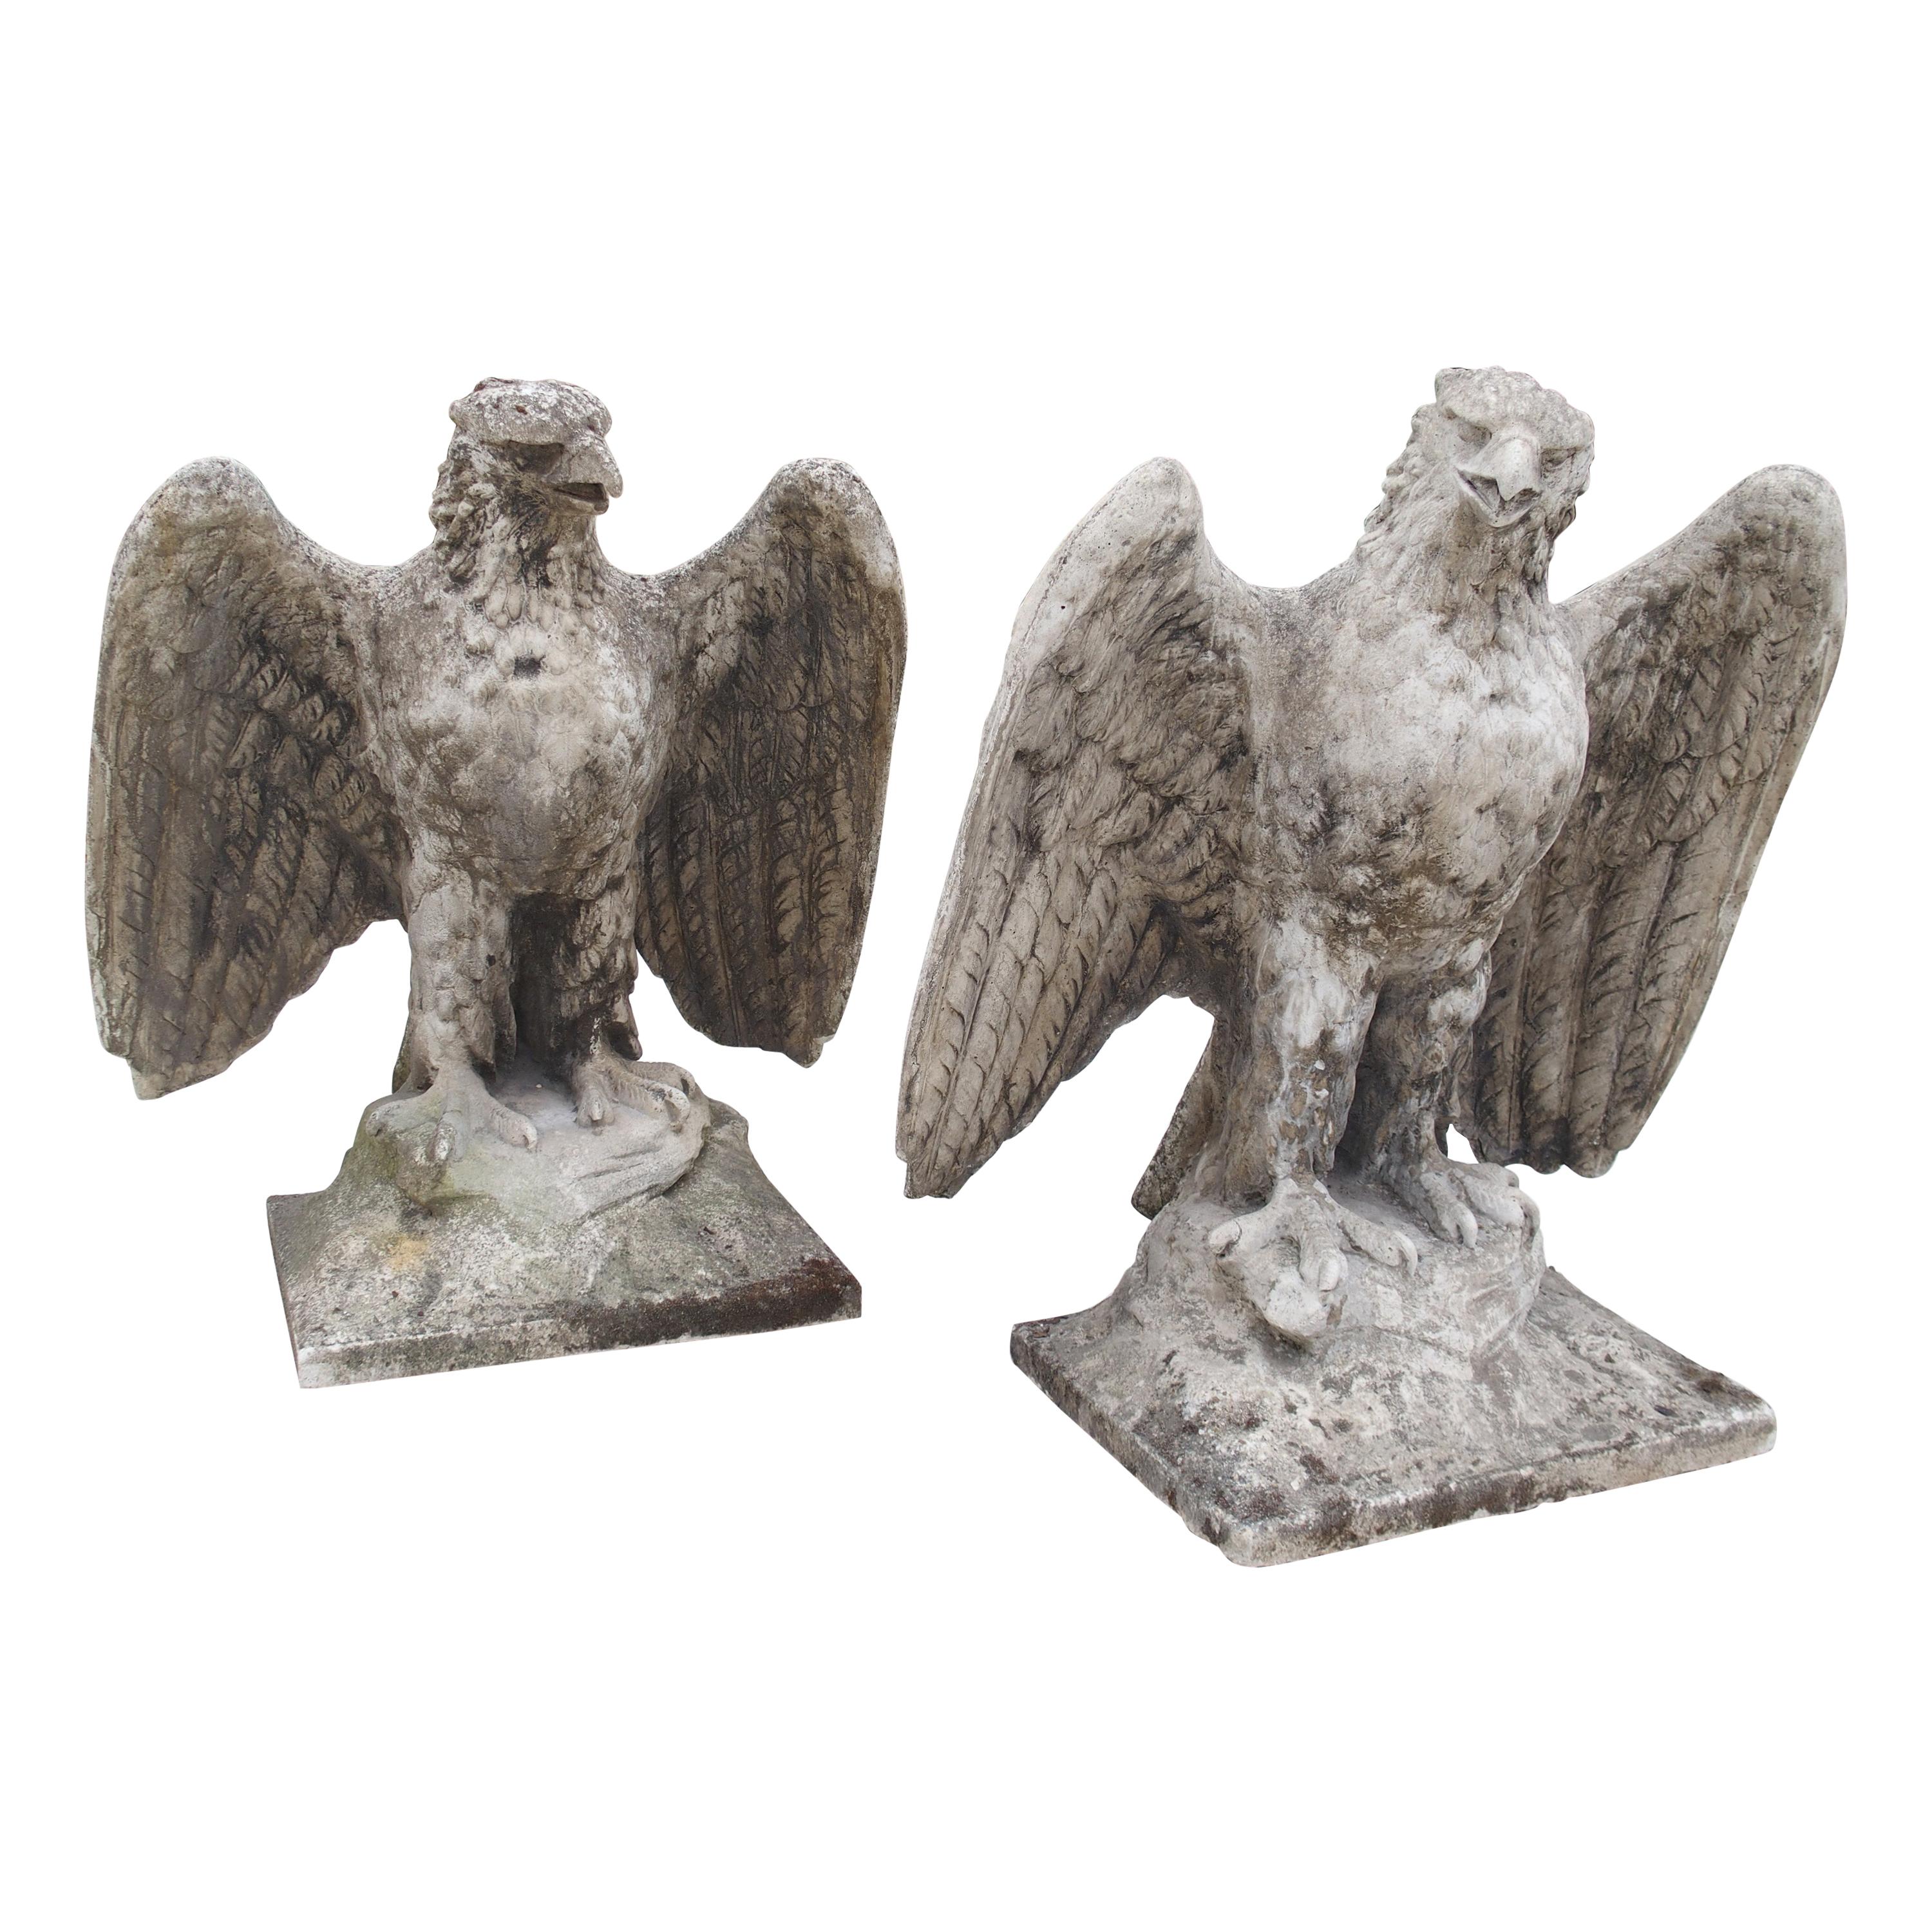 Pair of Large English Cast Stone Opposing Eagles, circa 1920s